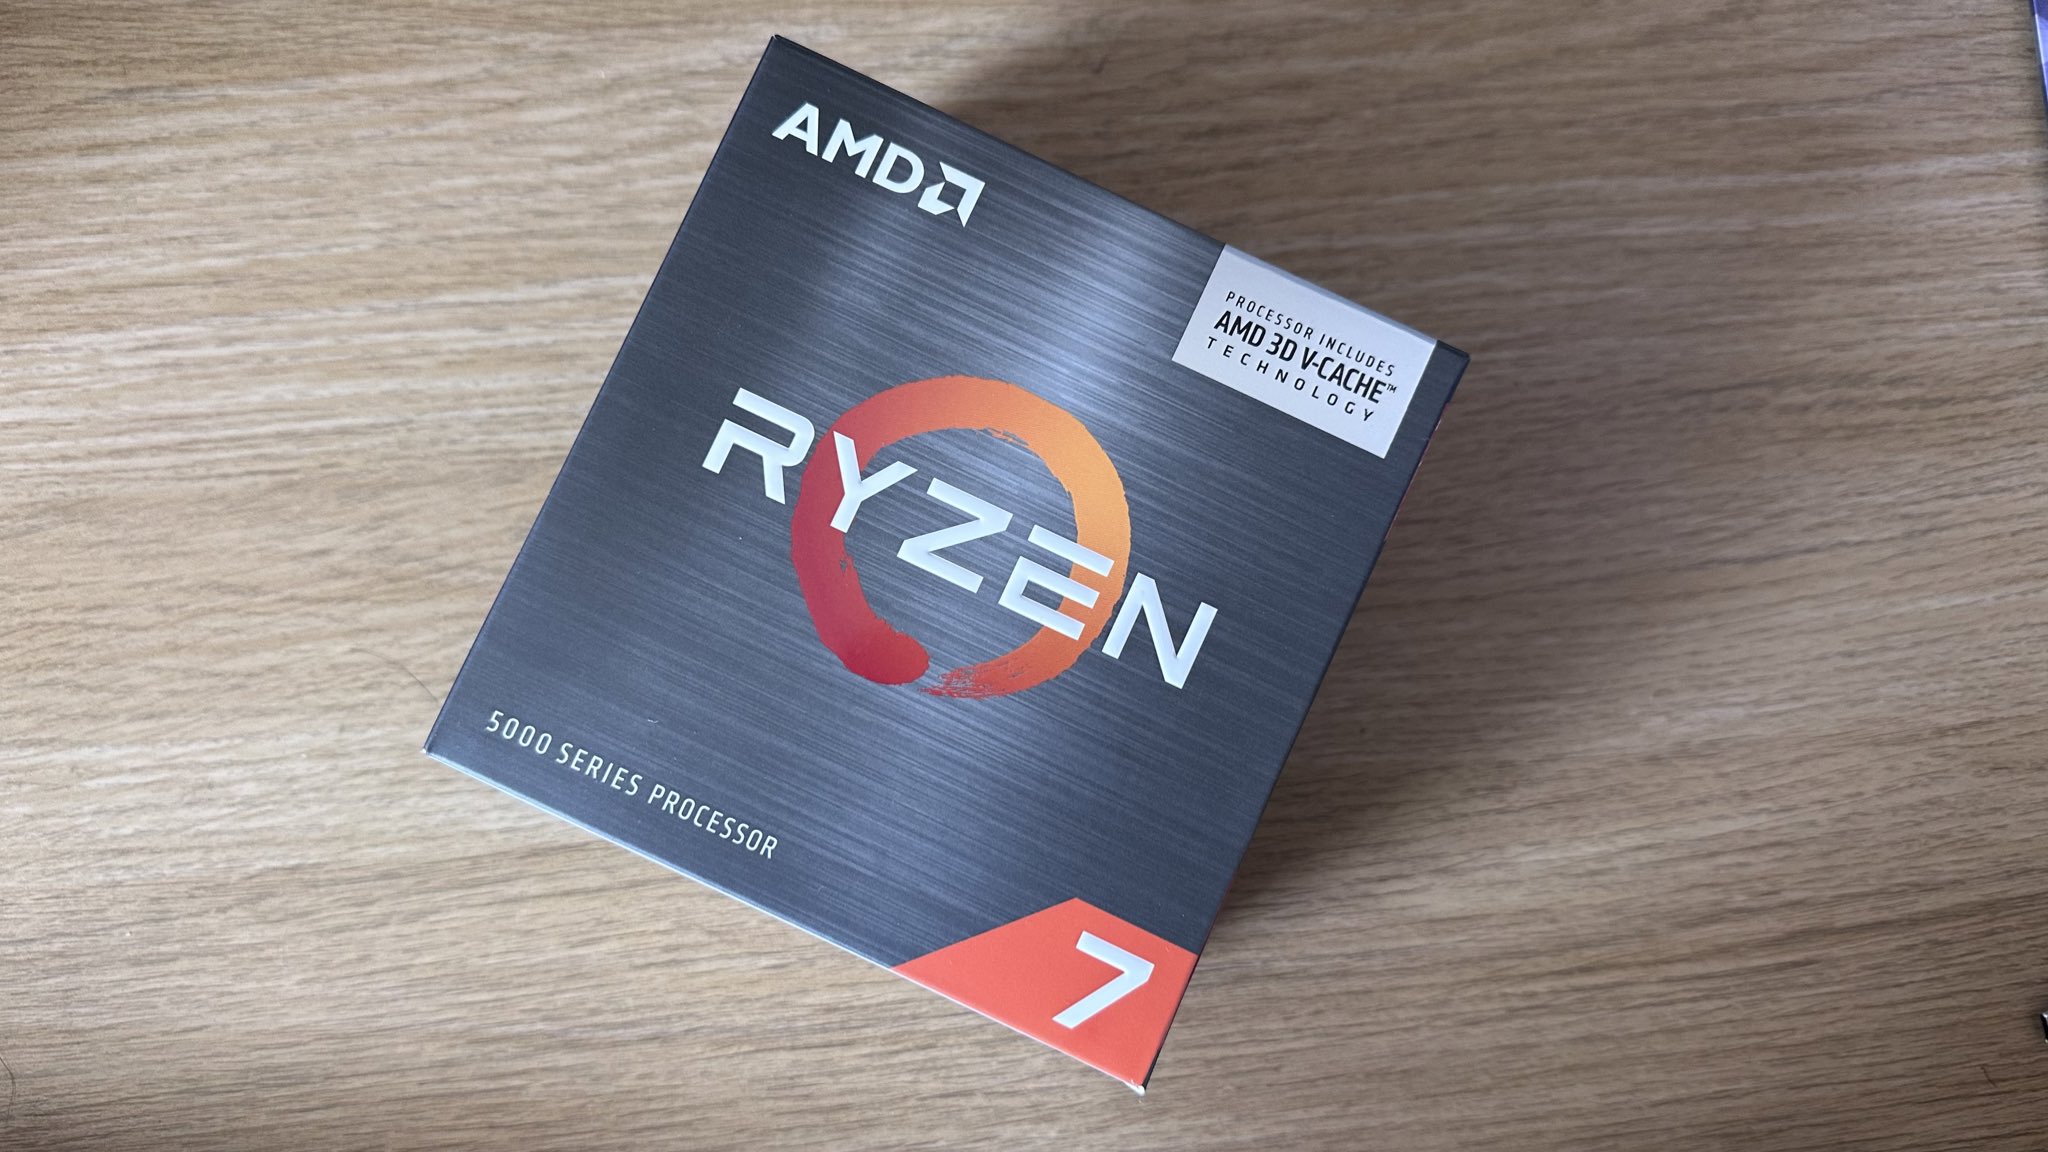 5 things you need to know about AMD's new Ryzen 7 5800X3D processor